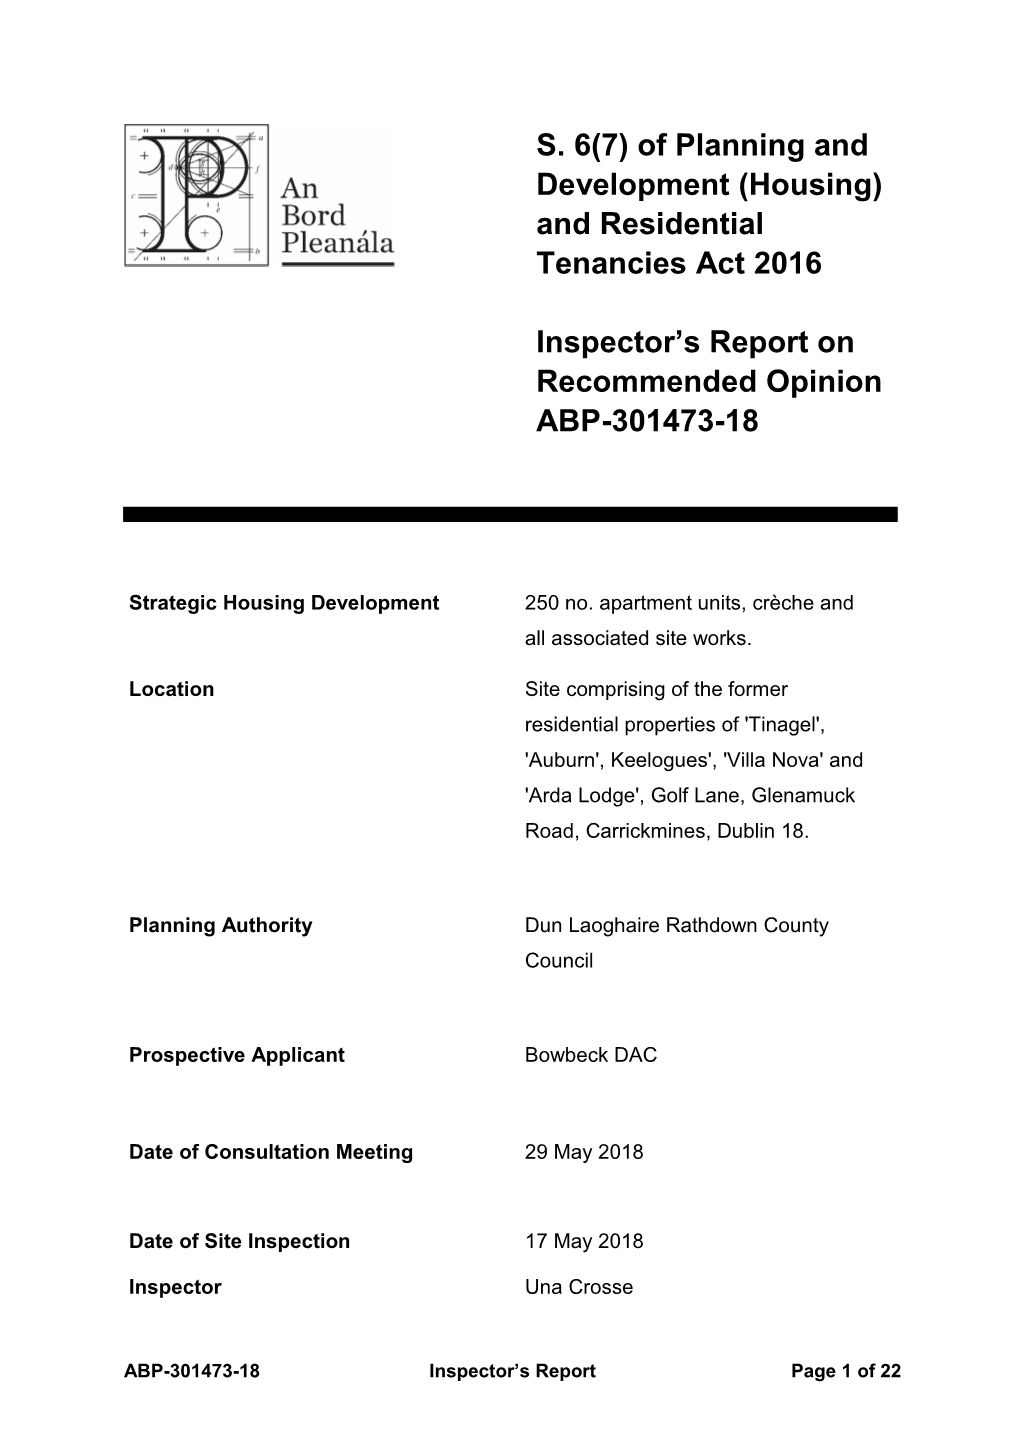 S. 6(7) of Planning and Development (Housing) and Residential Tenancies Act 2016